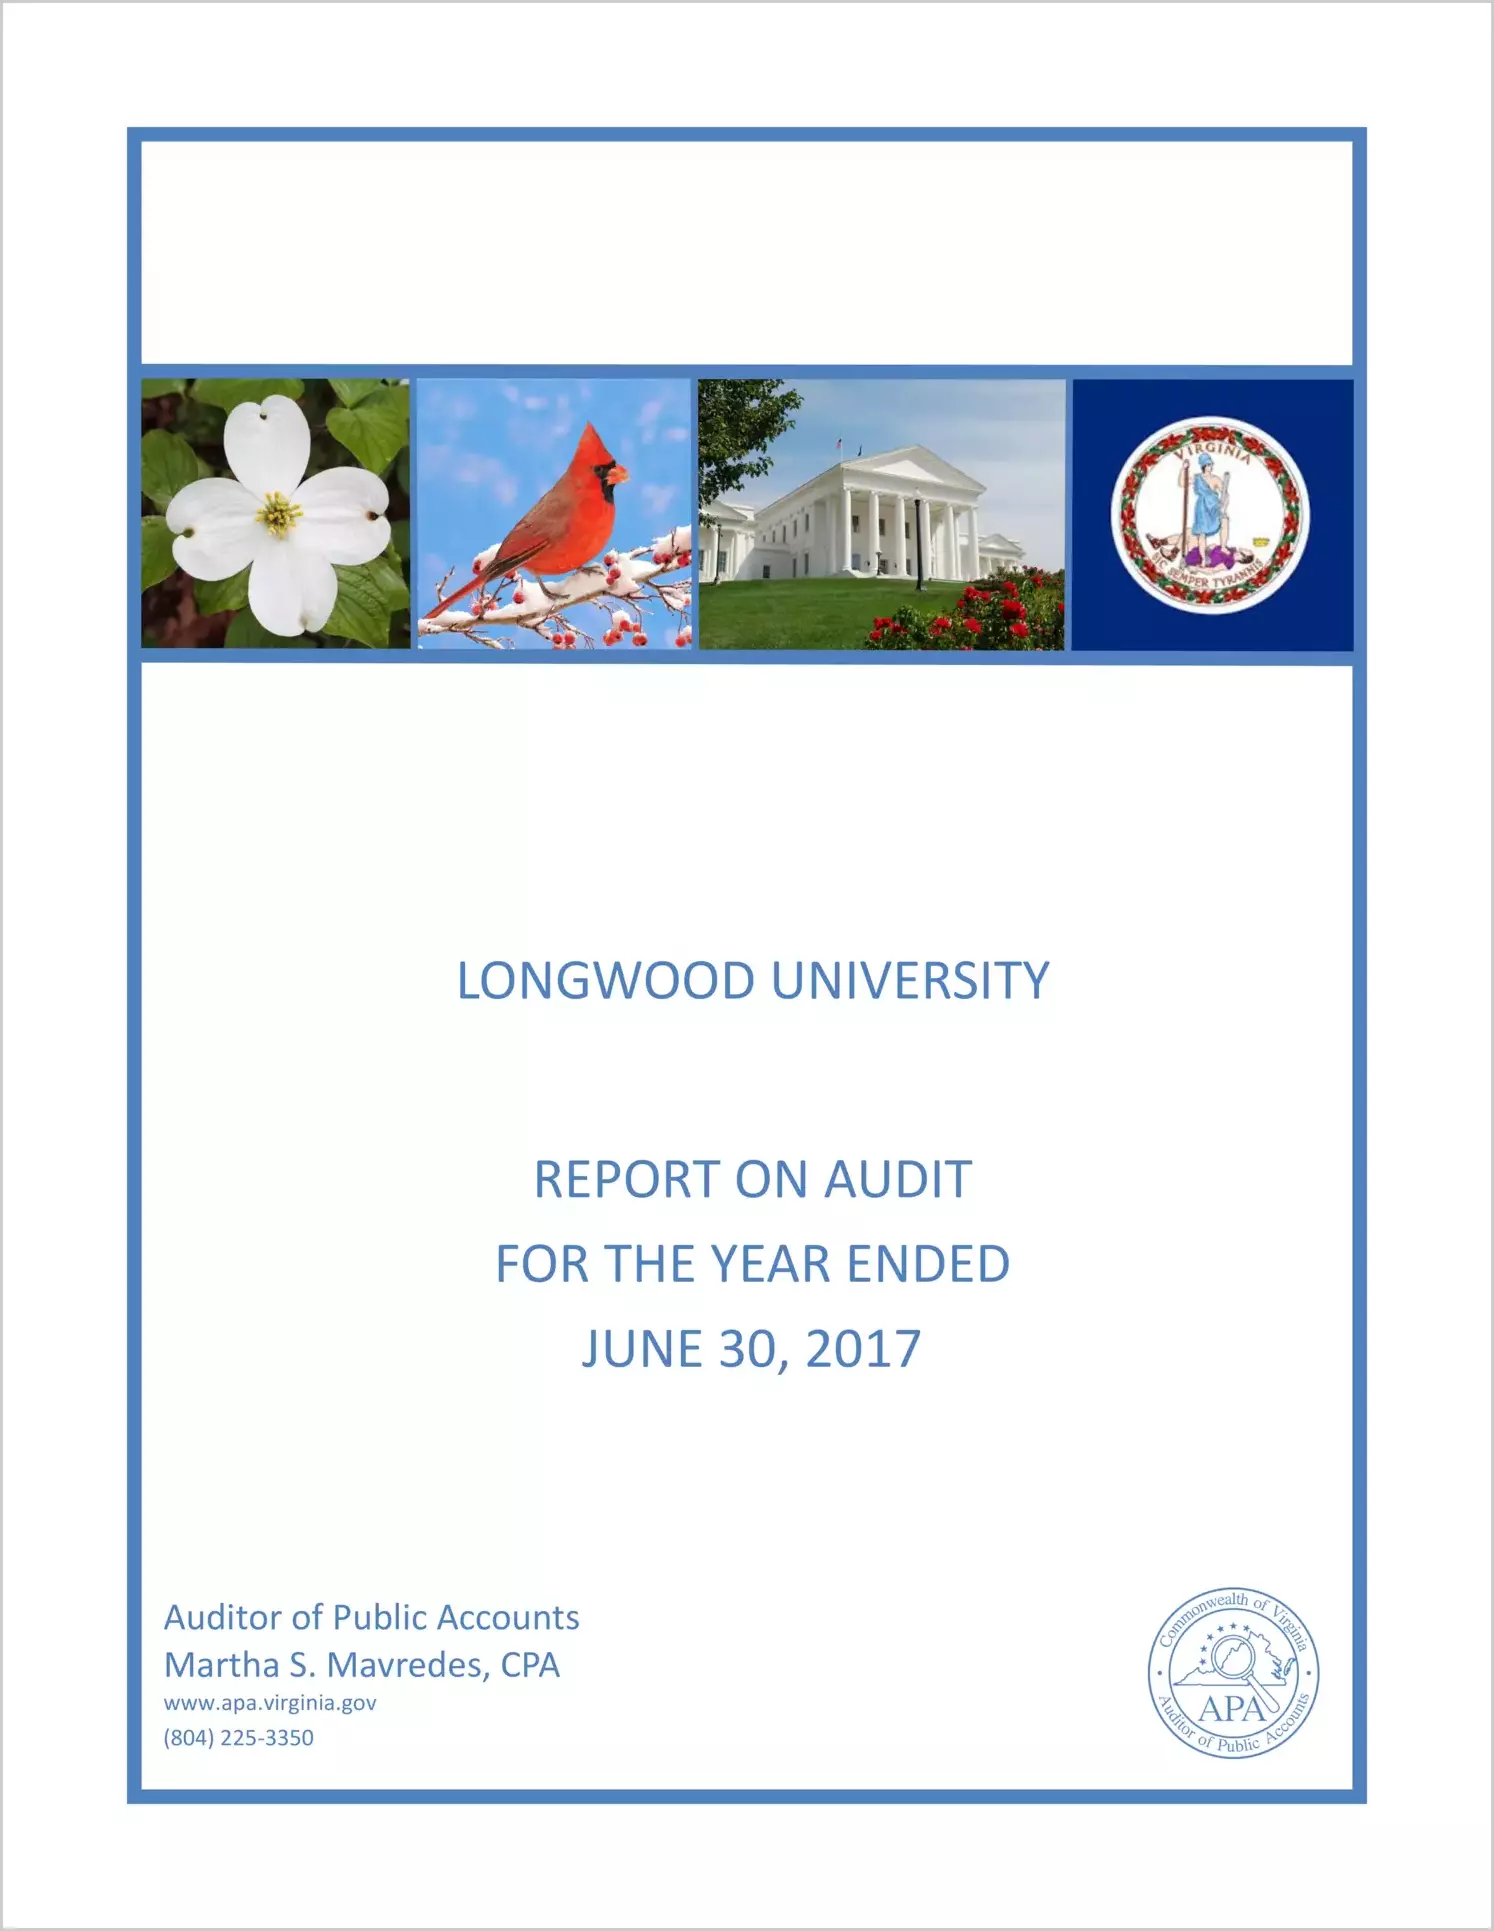 Longwood University for the year ended June 30, 2017